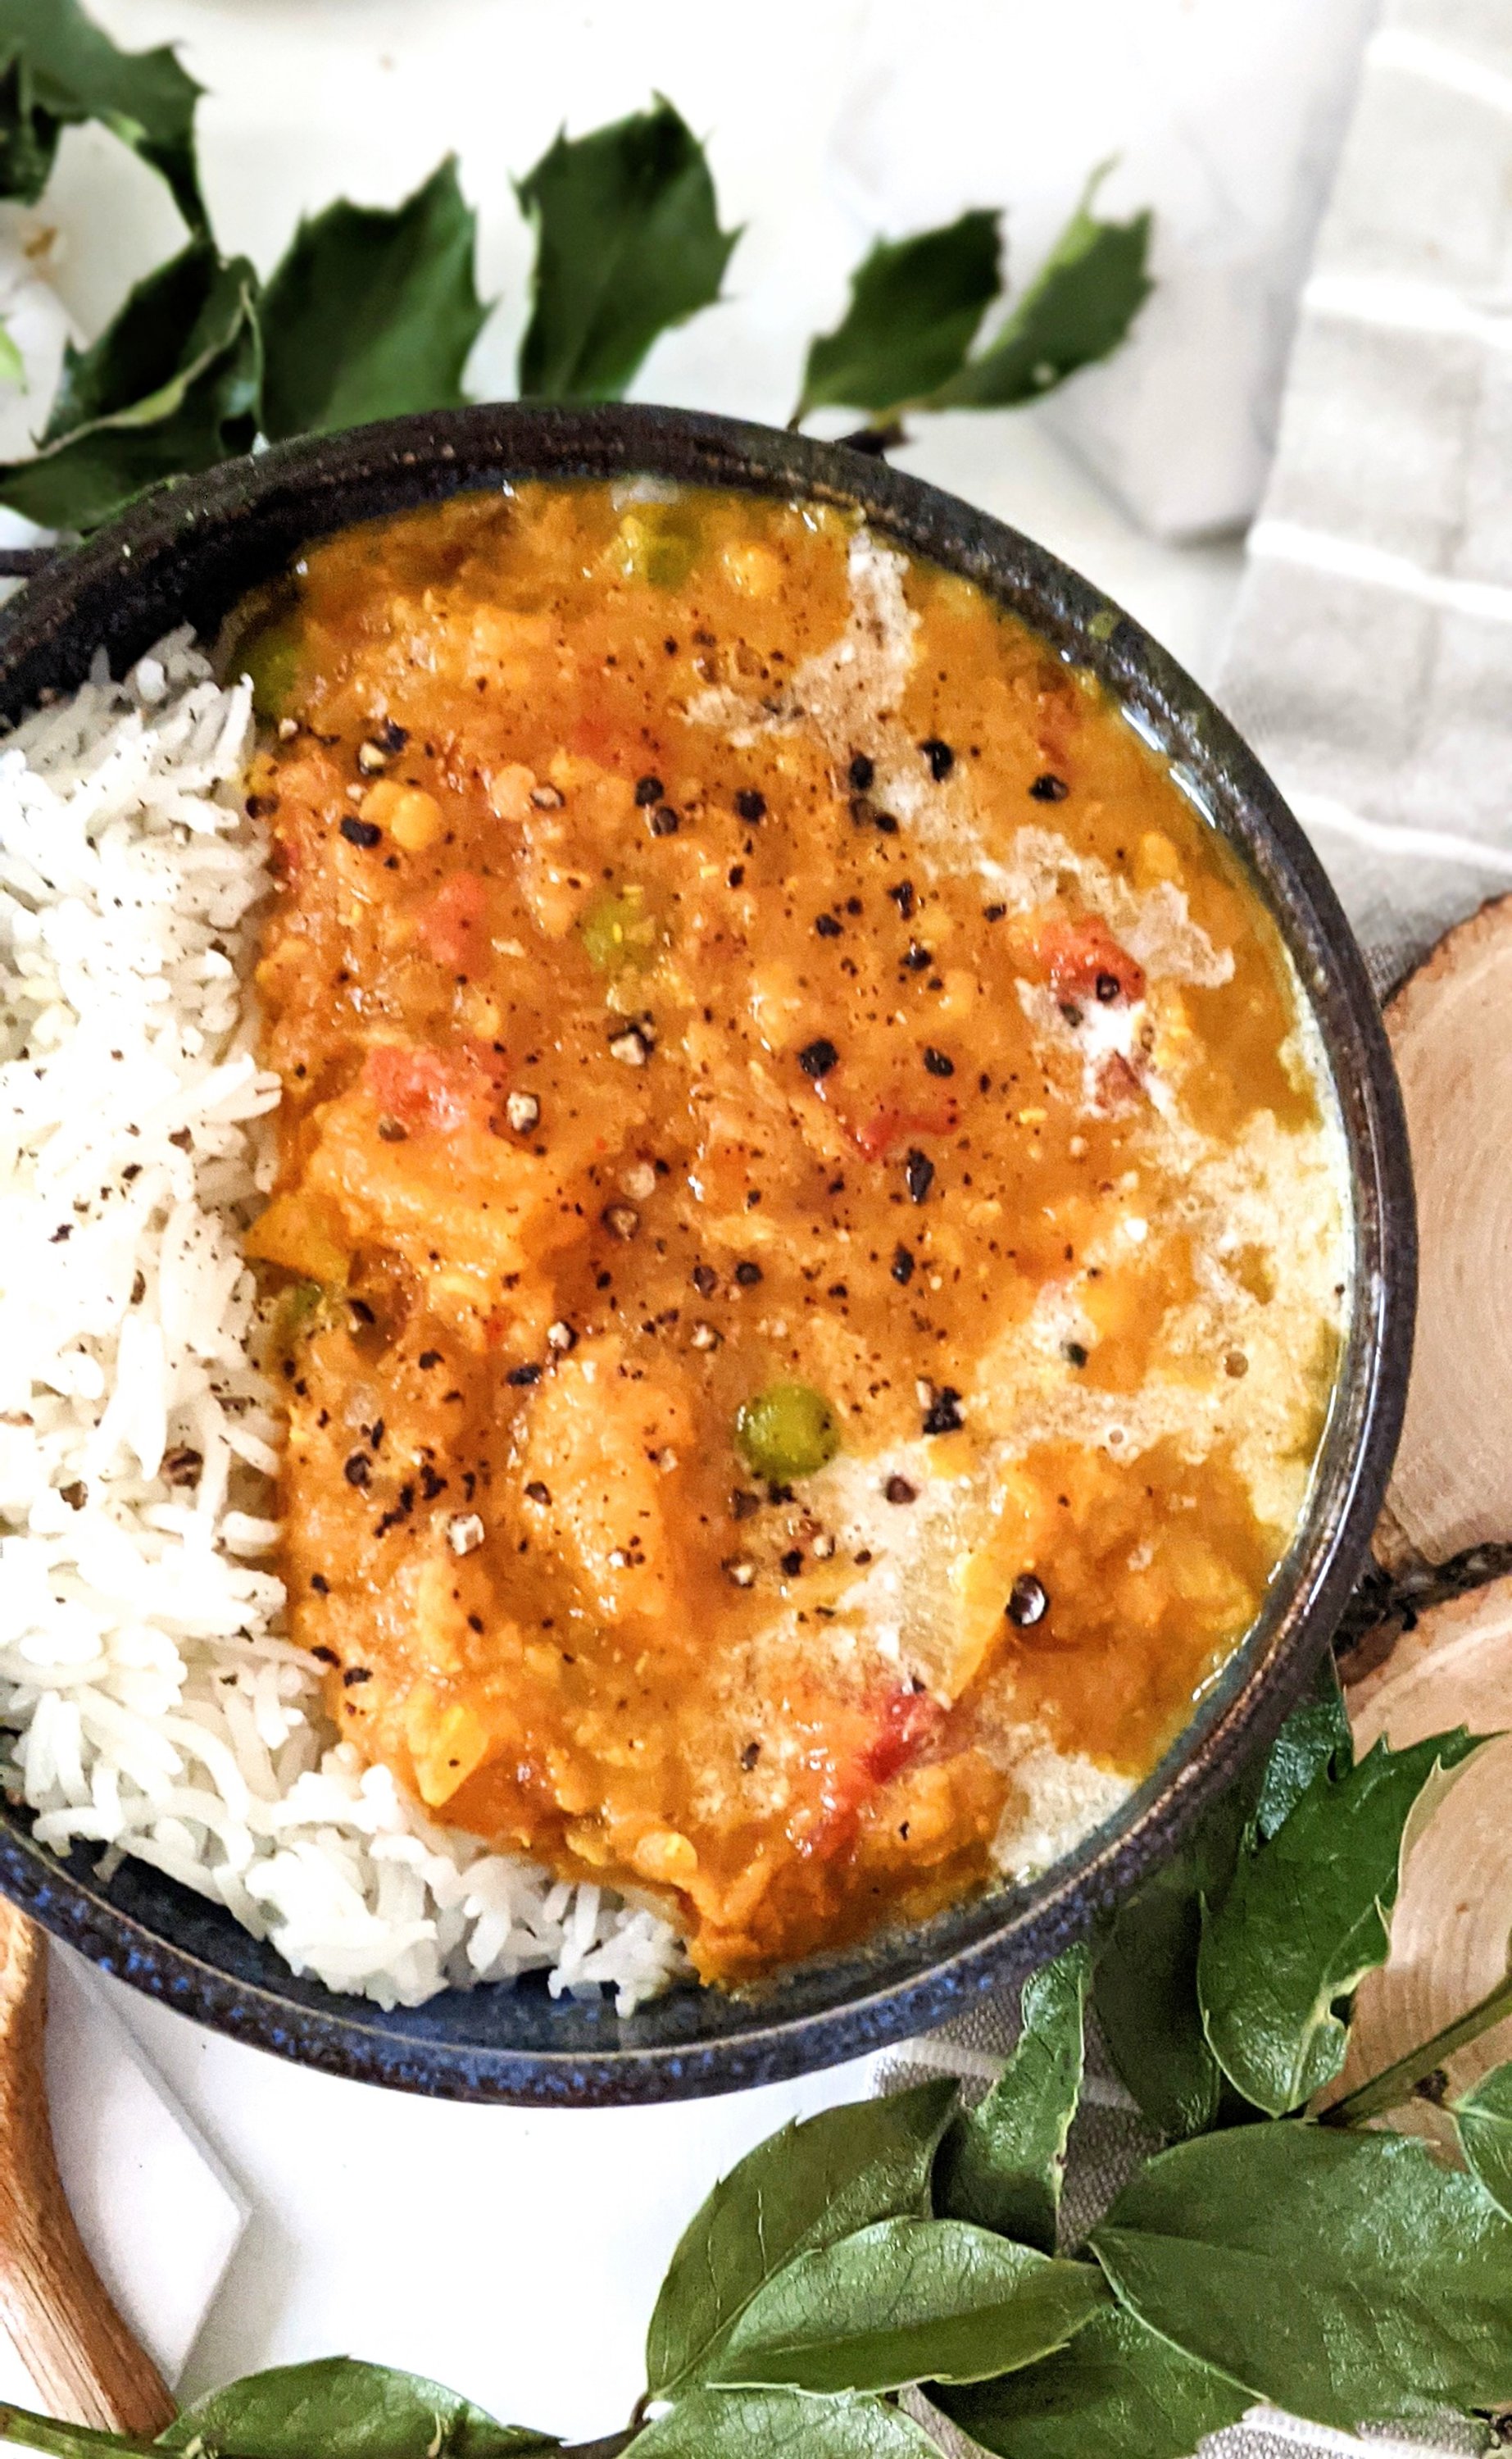 vegan butternut squash red lentil dahl recipe easy homemade dahl dairy free with frozen butternut squash recipes from the freezer ingredients indian food gluten free